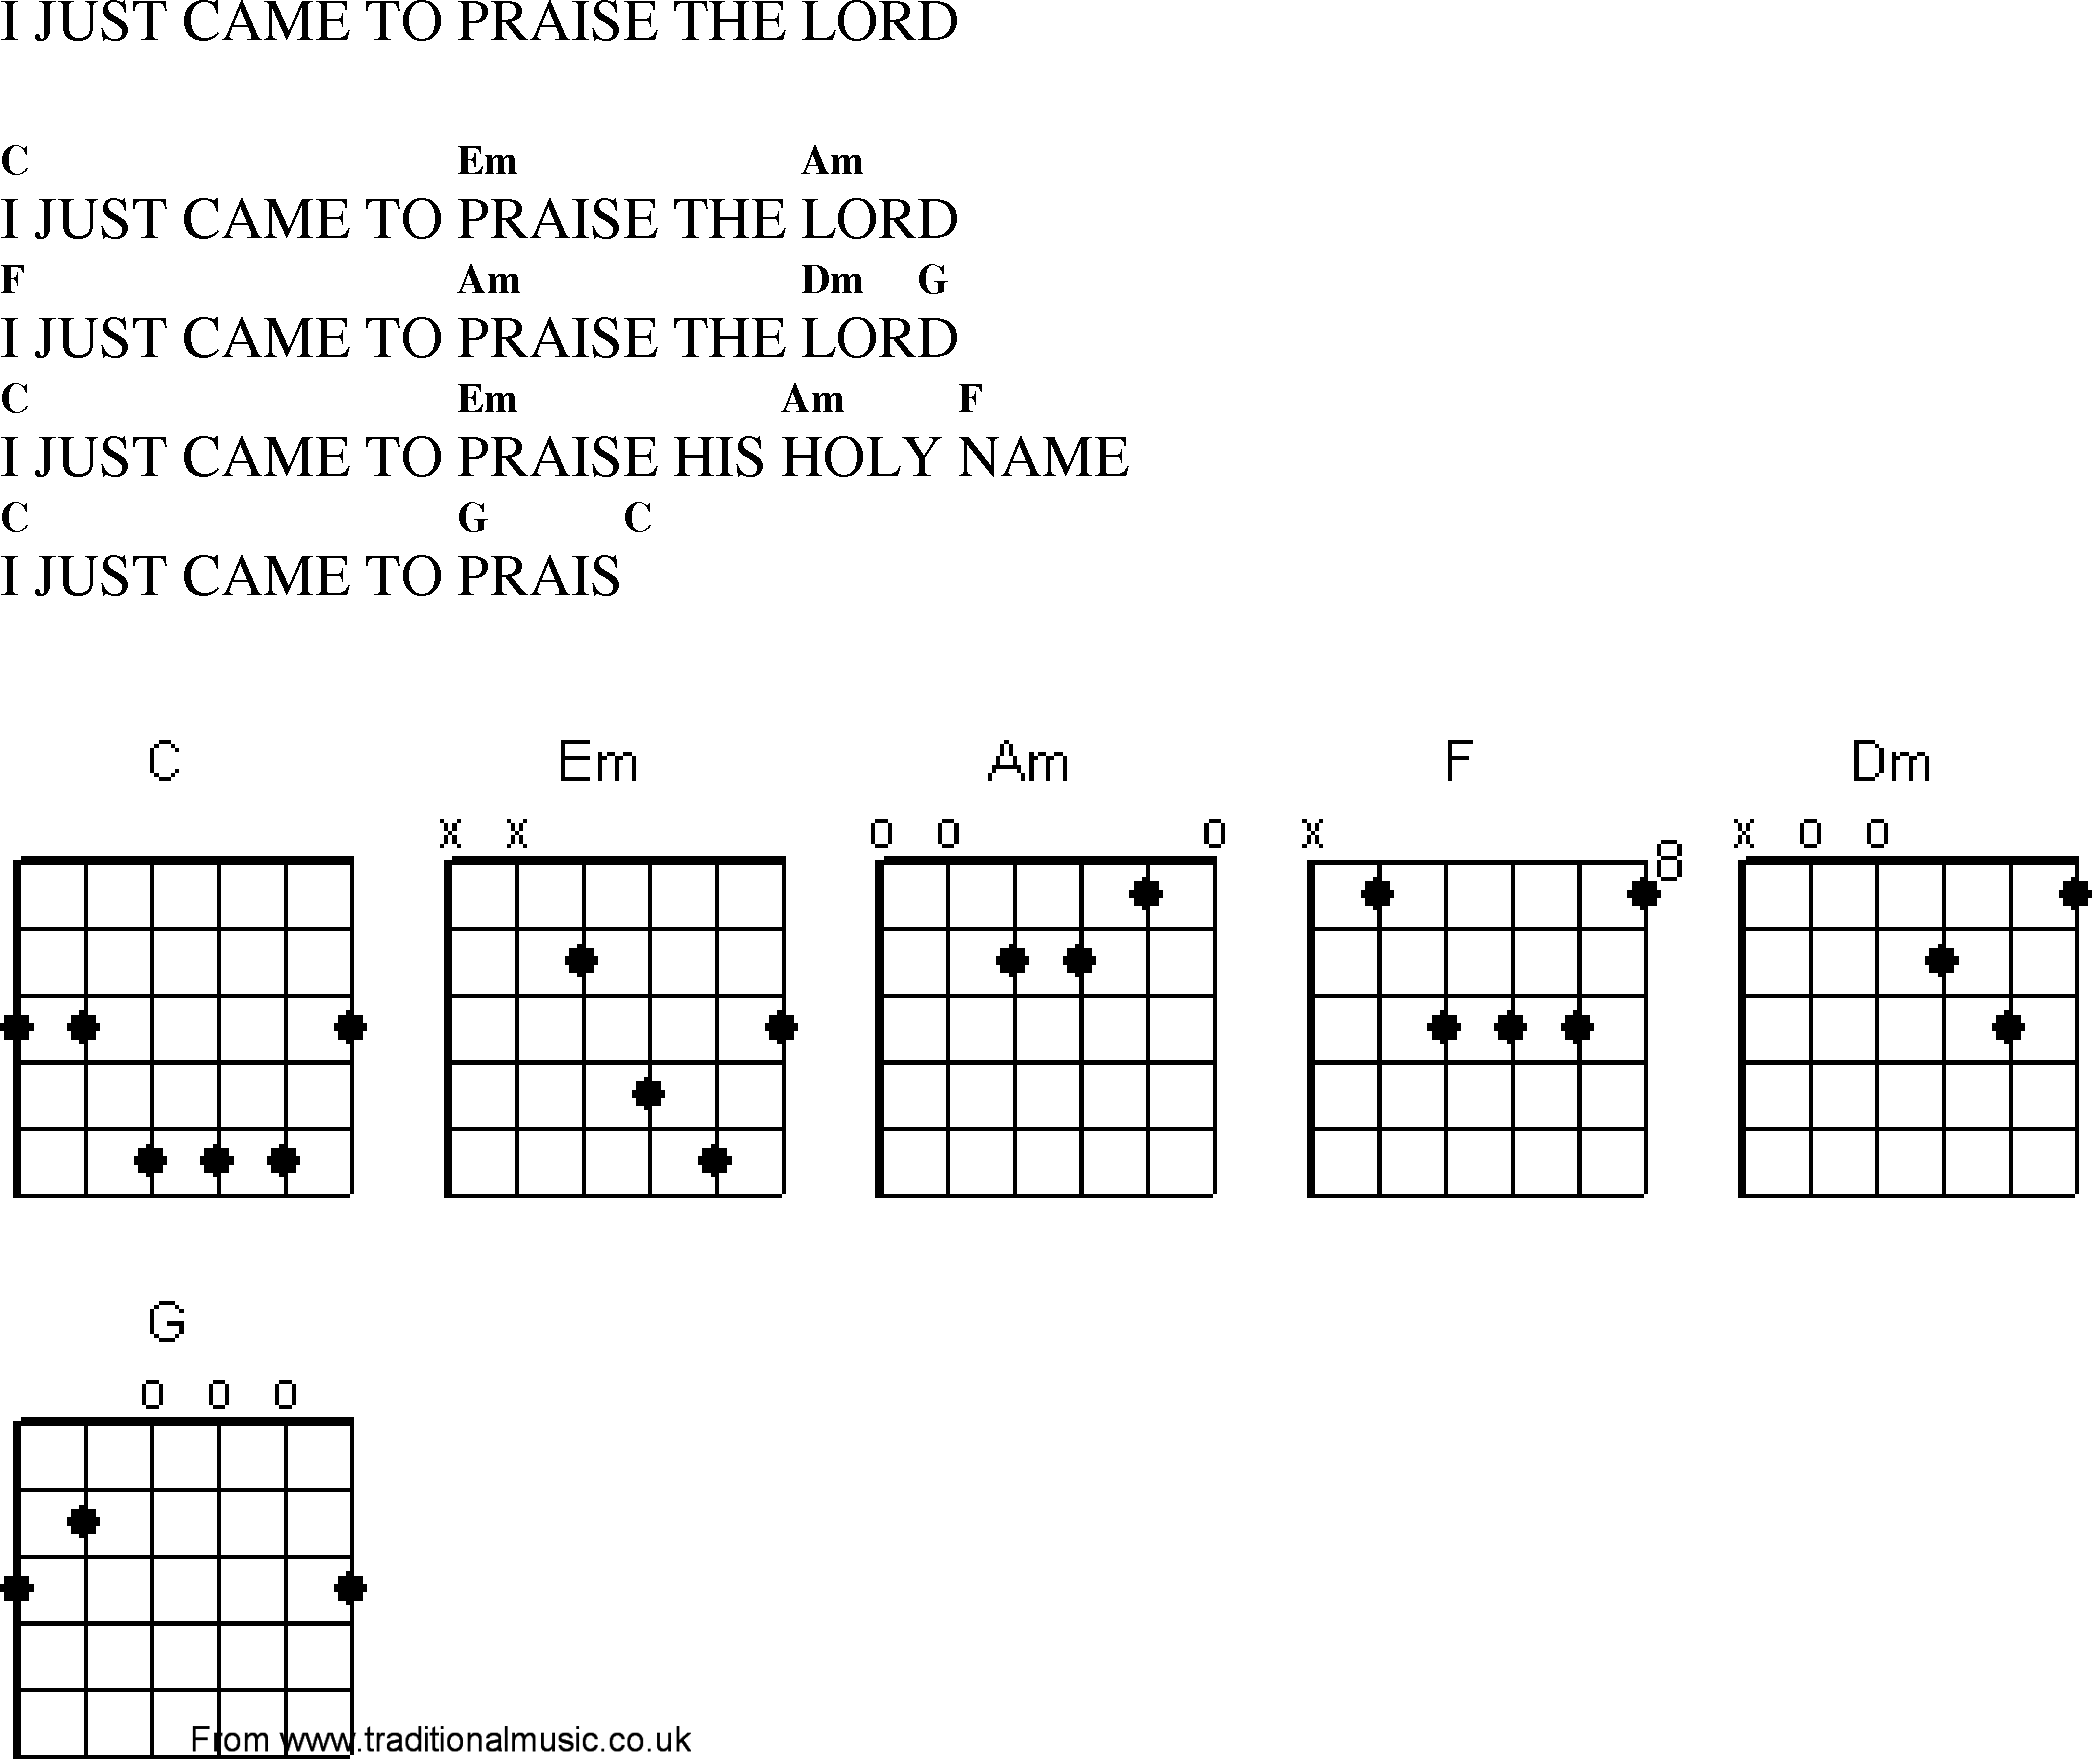 Gospel Song: i_just_came_to_praise_the_lord, lyrics and chords.